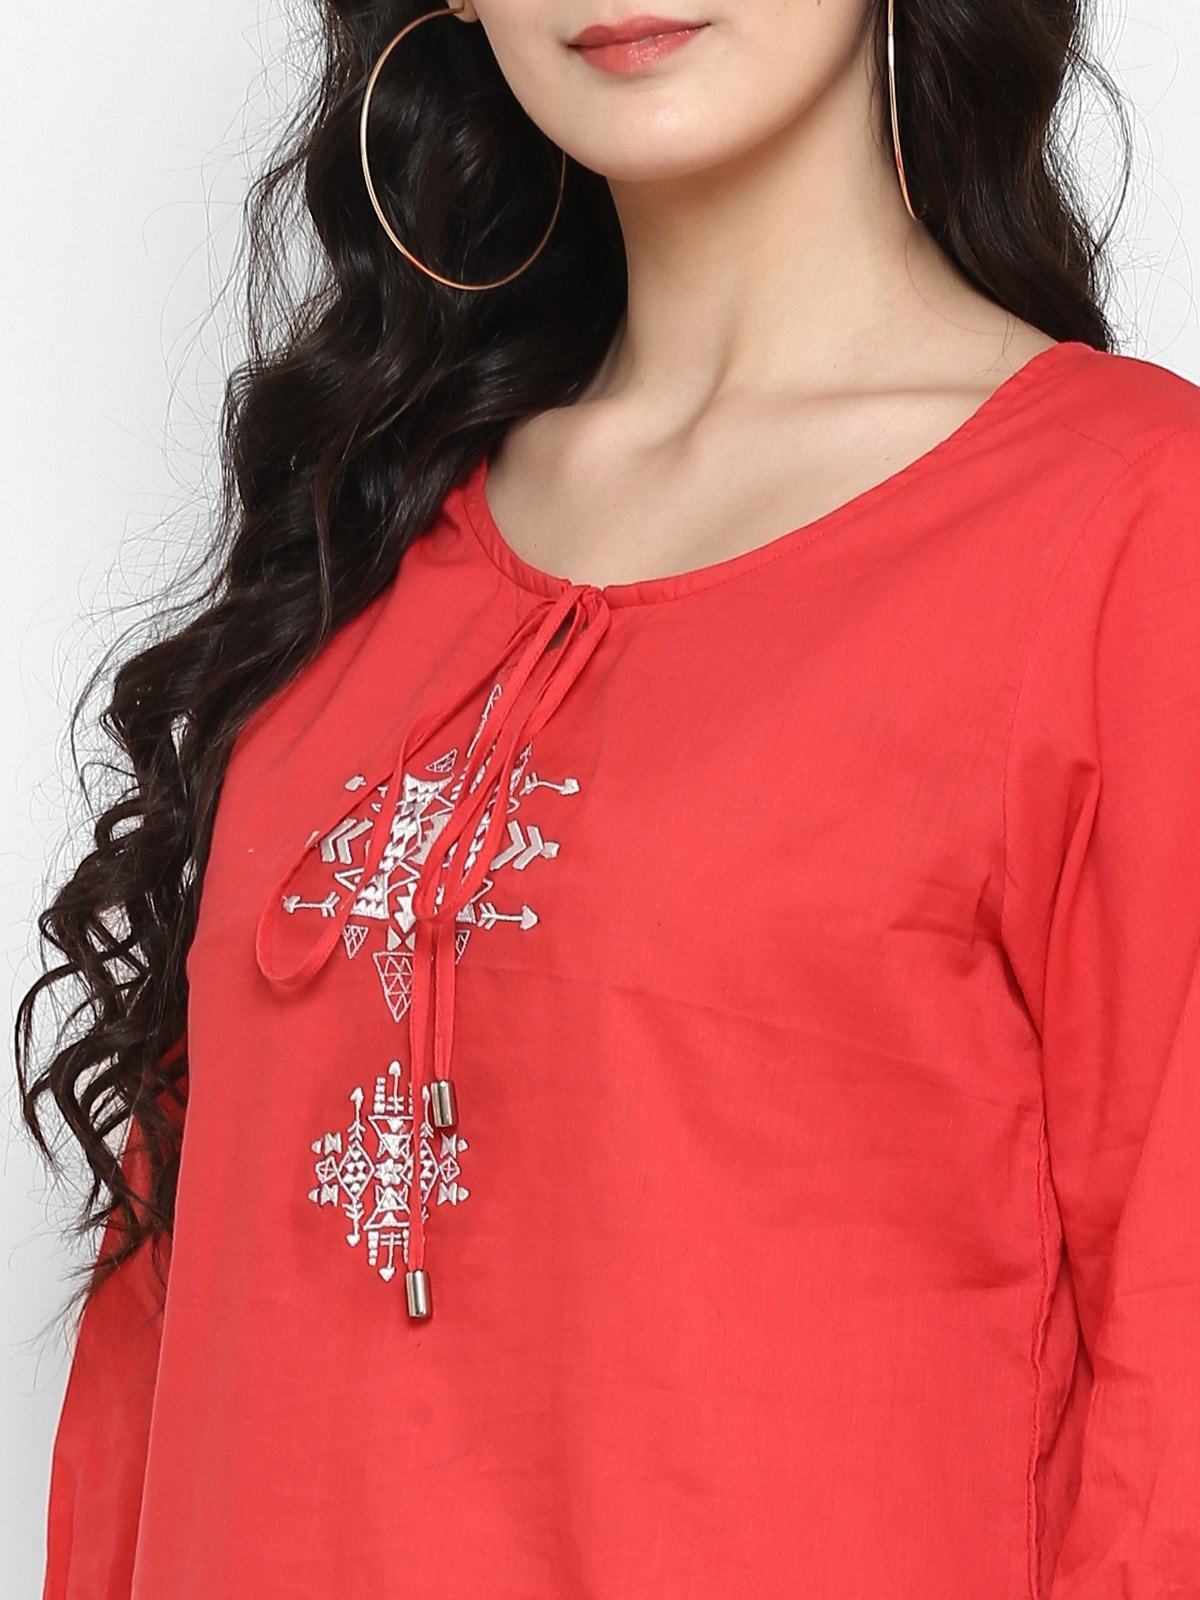 Women's Bohemian Embroidered Top - Pannkh